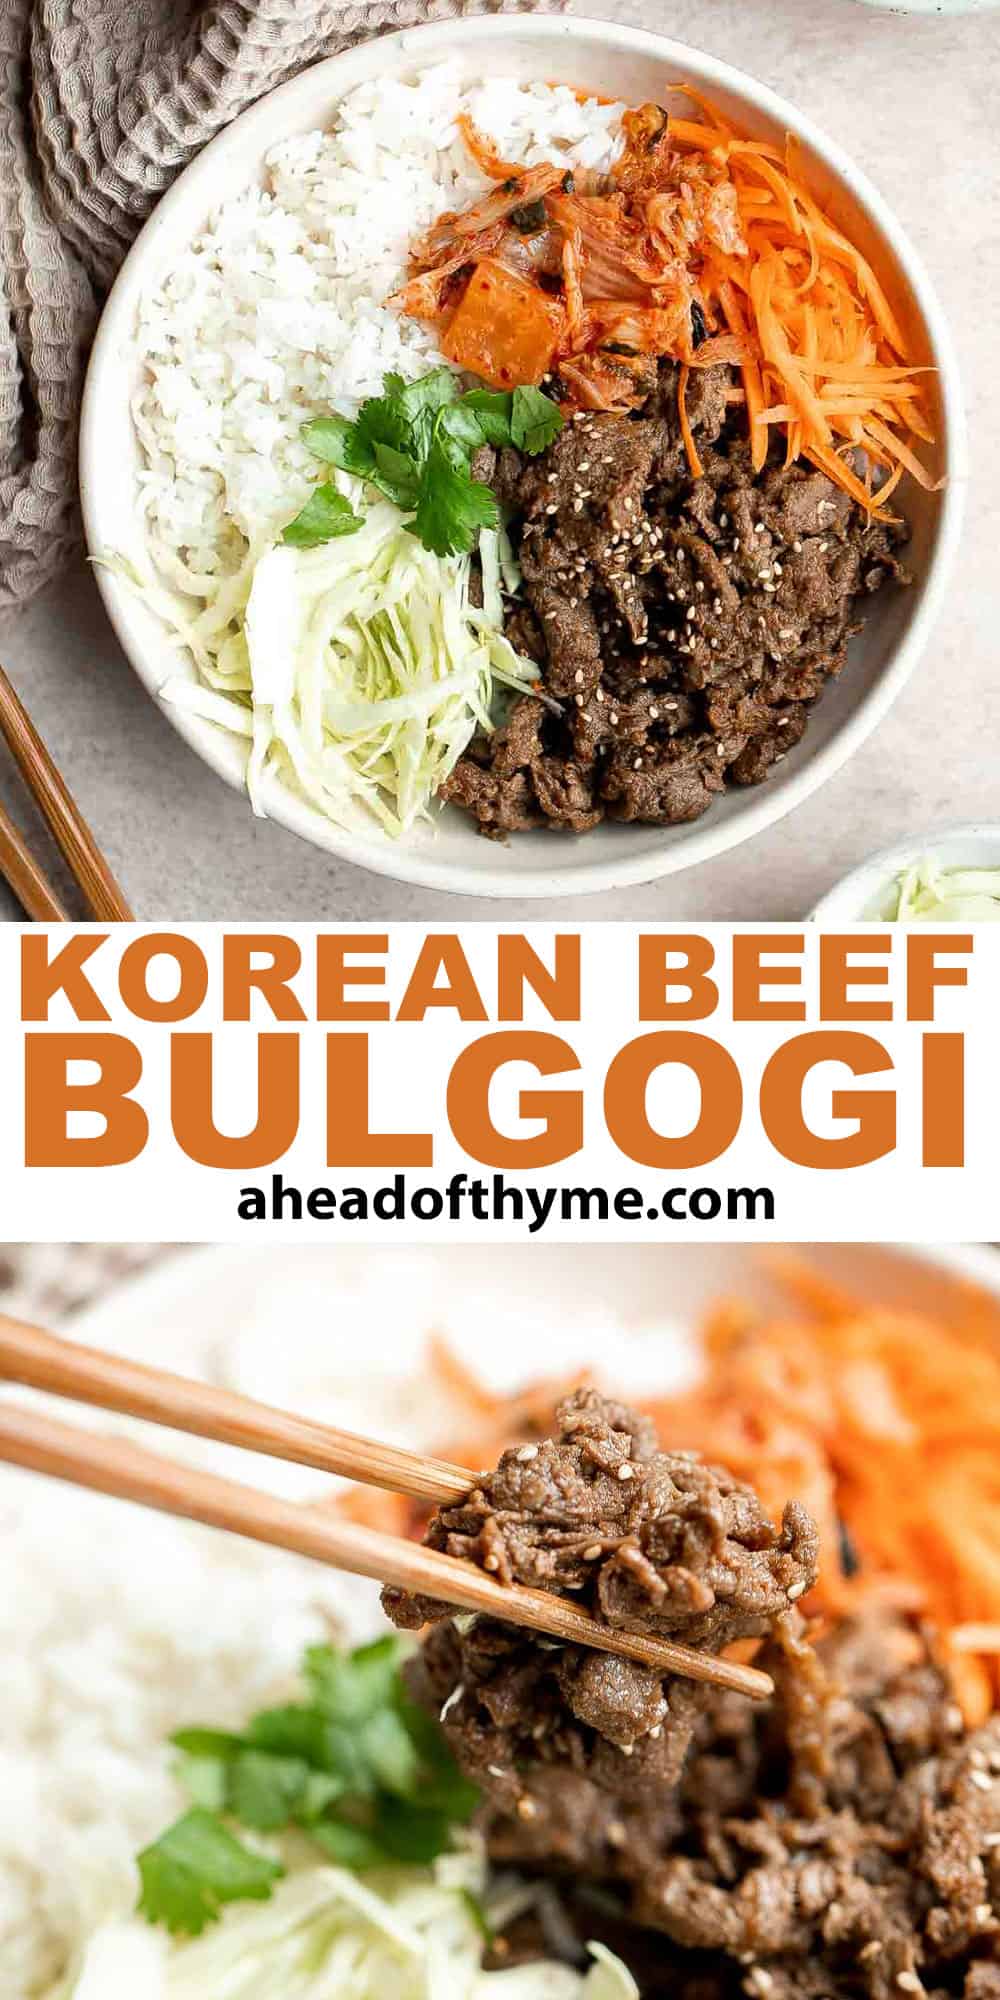 Korean Beef Bulgogi is a tasty, quick and easy 30-minute meal made with thinly sliced beef marinated in a delicious sweet and savory garlic soy sauce. | aheadofthyme.com